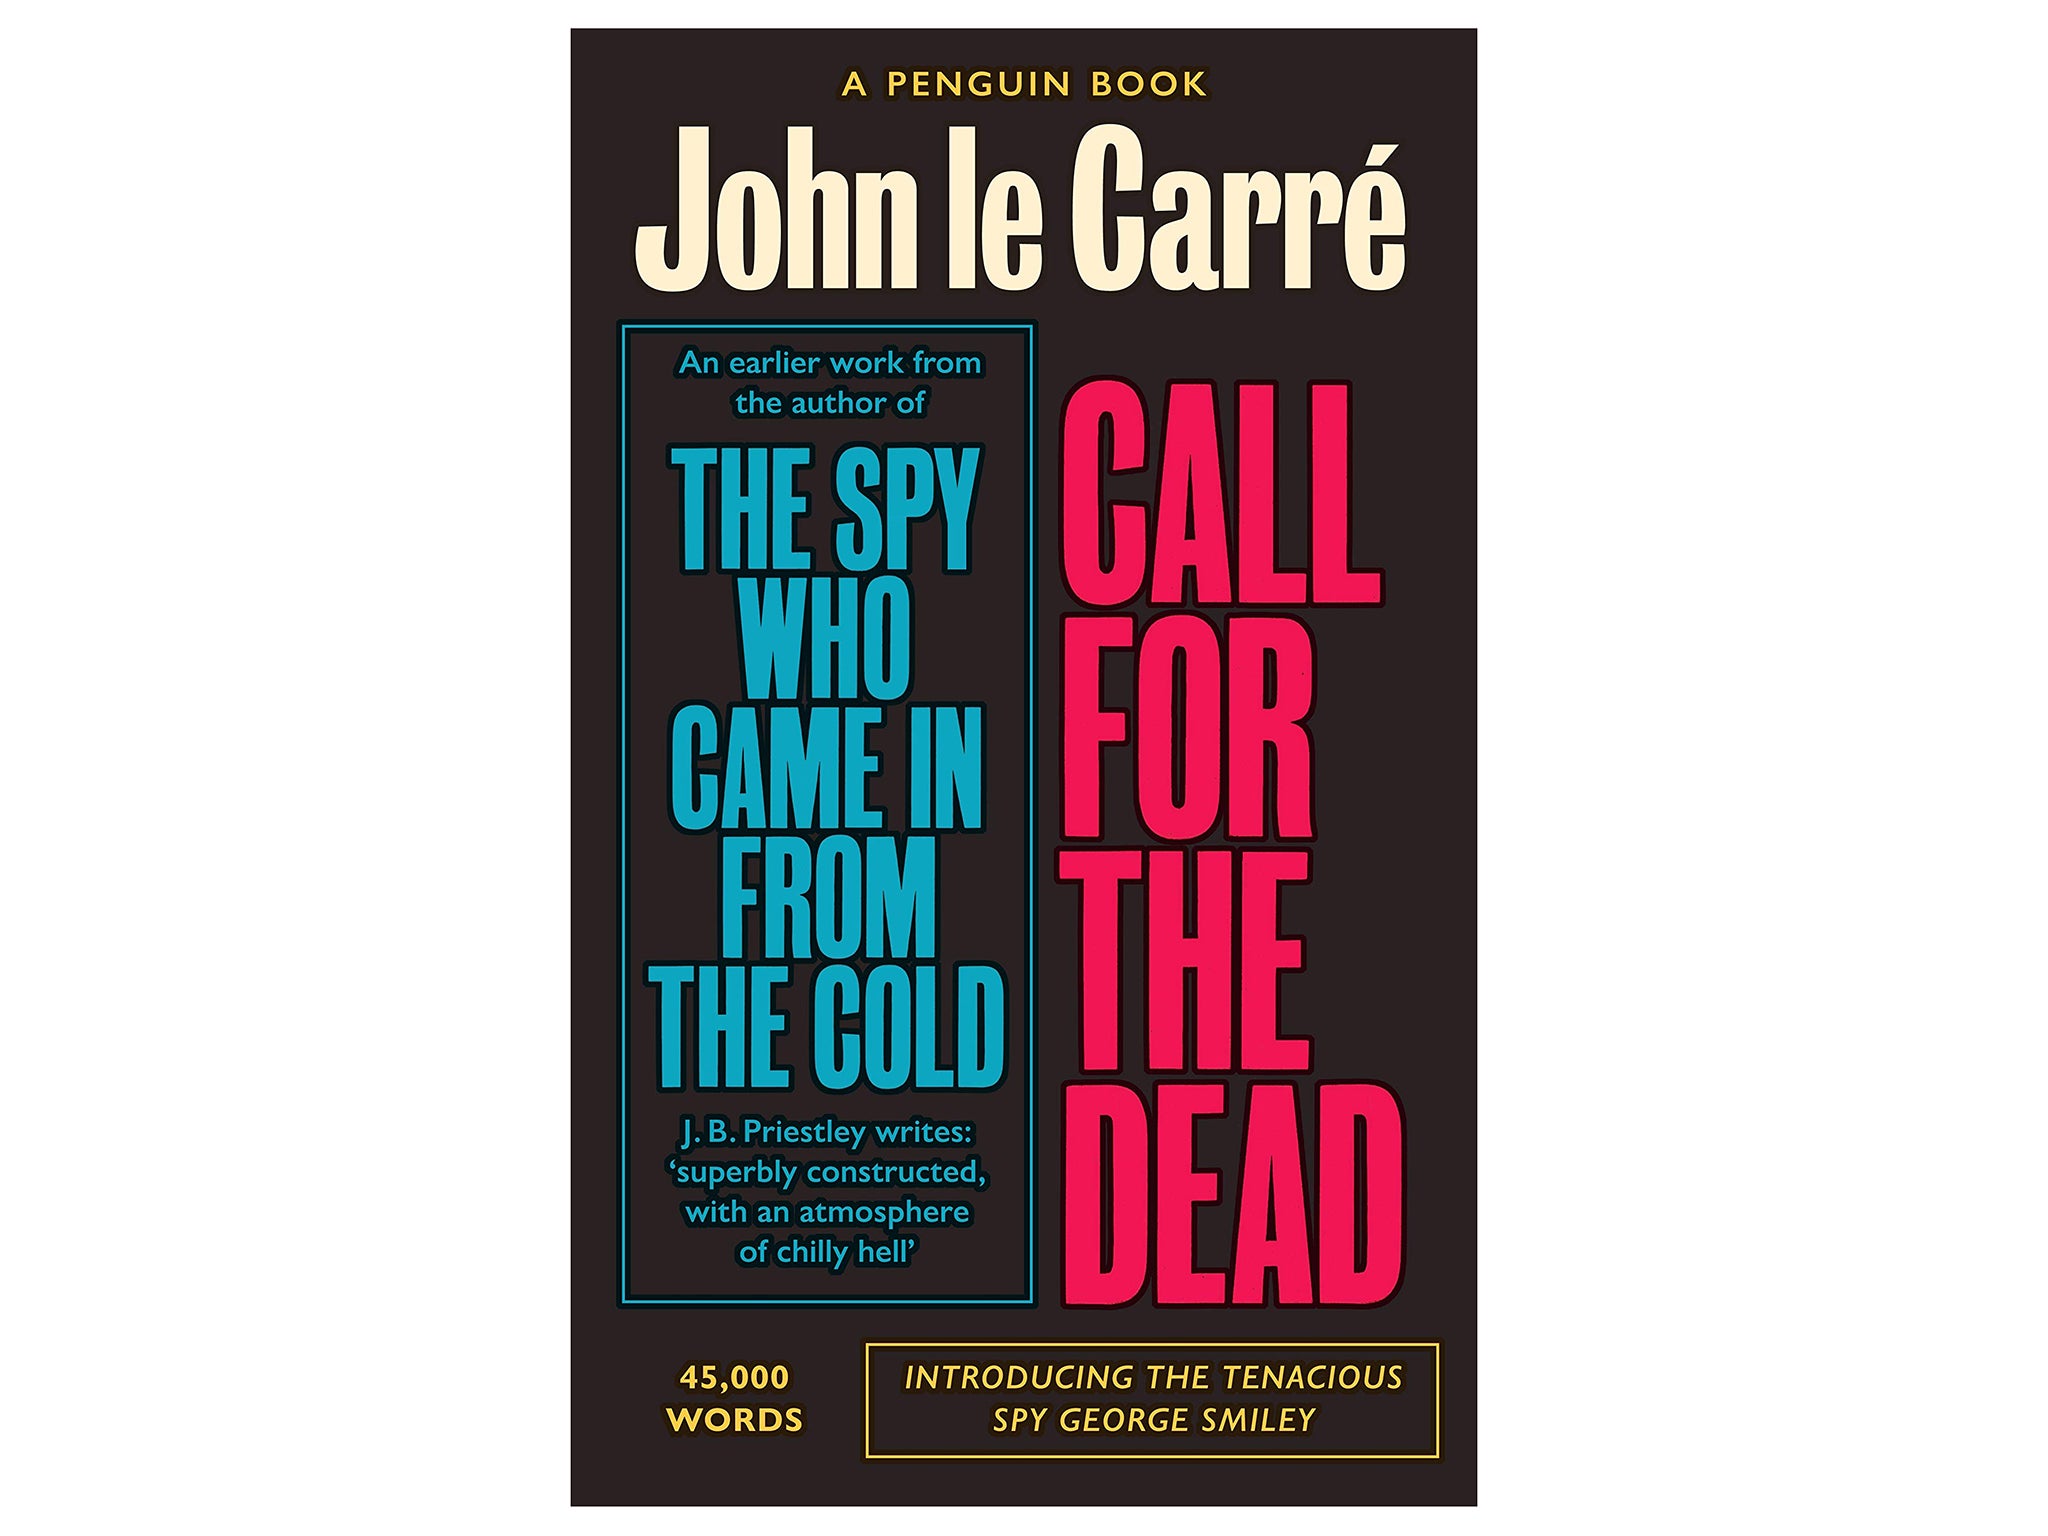 call-for-the-dead-indybest-john-le-carre.jpg